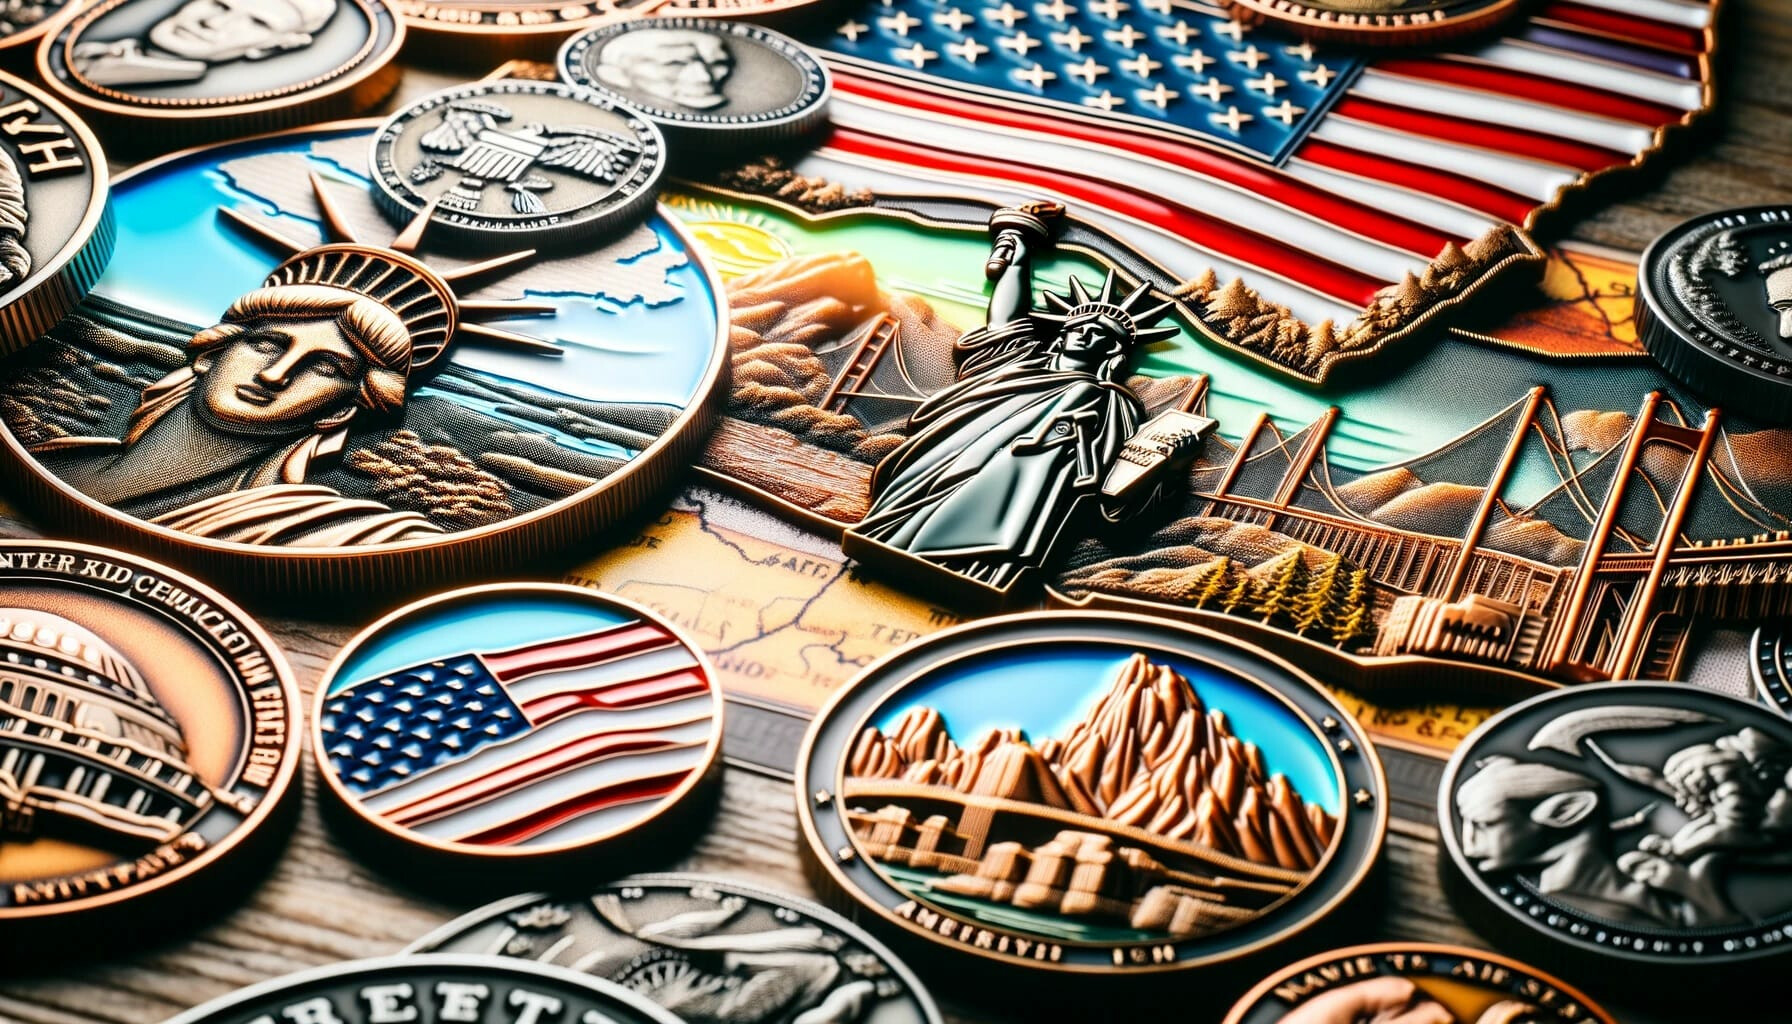 Custom Challenge Coins Inspired by America's Landmarks and Sights